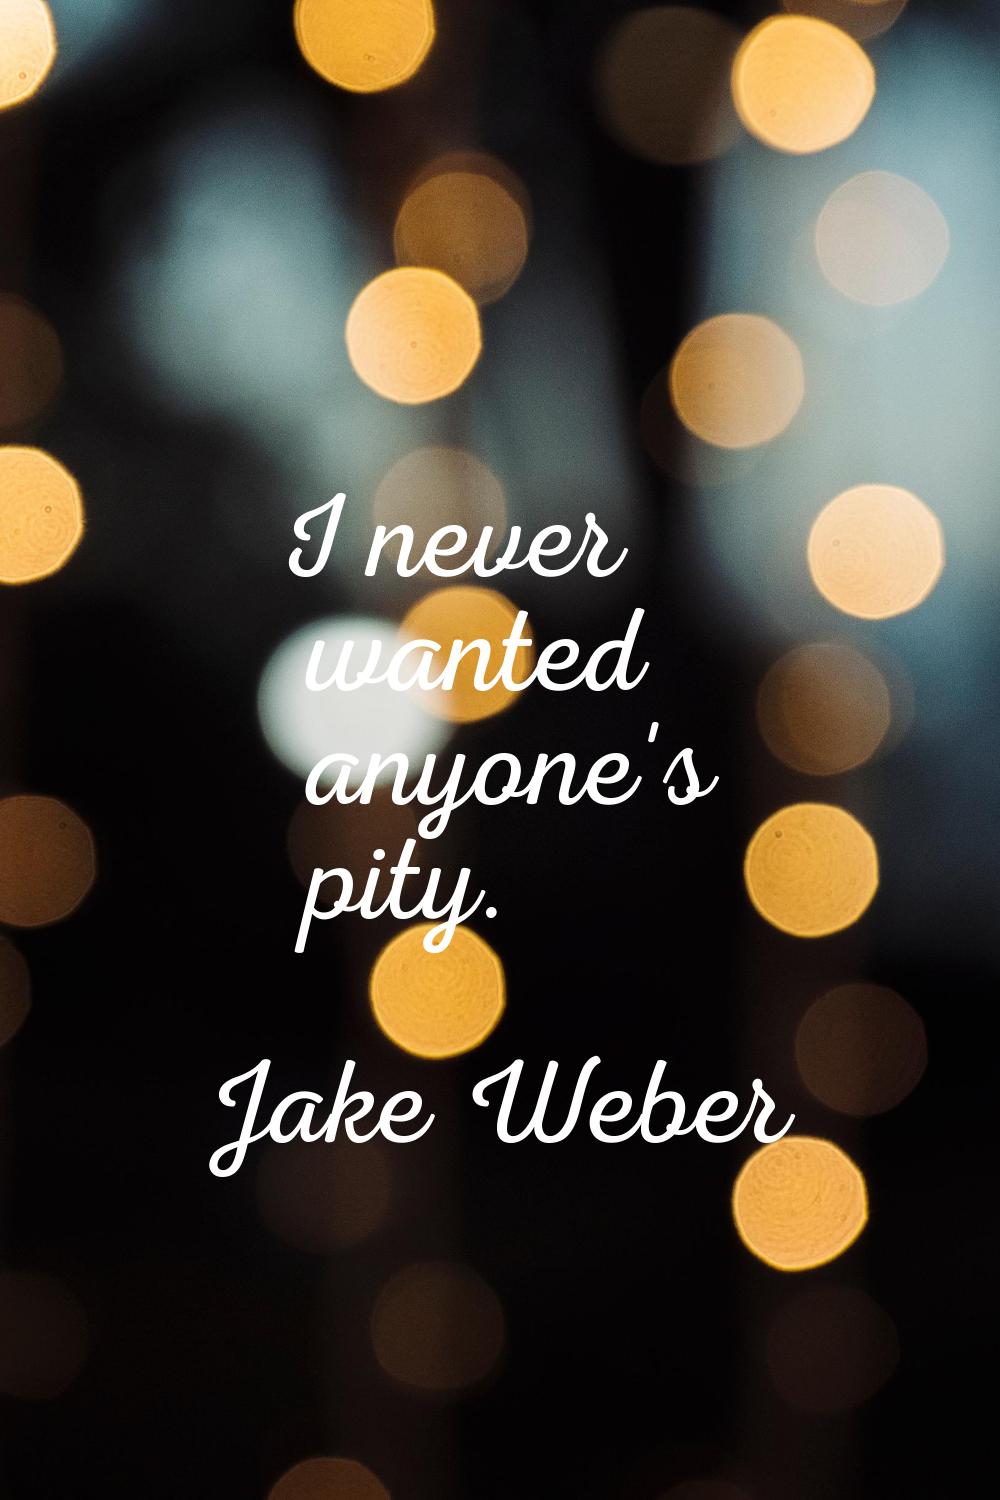 I never wanted anyone's pity.